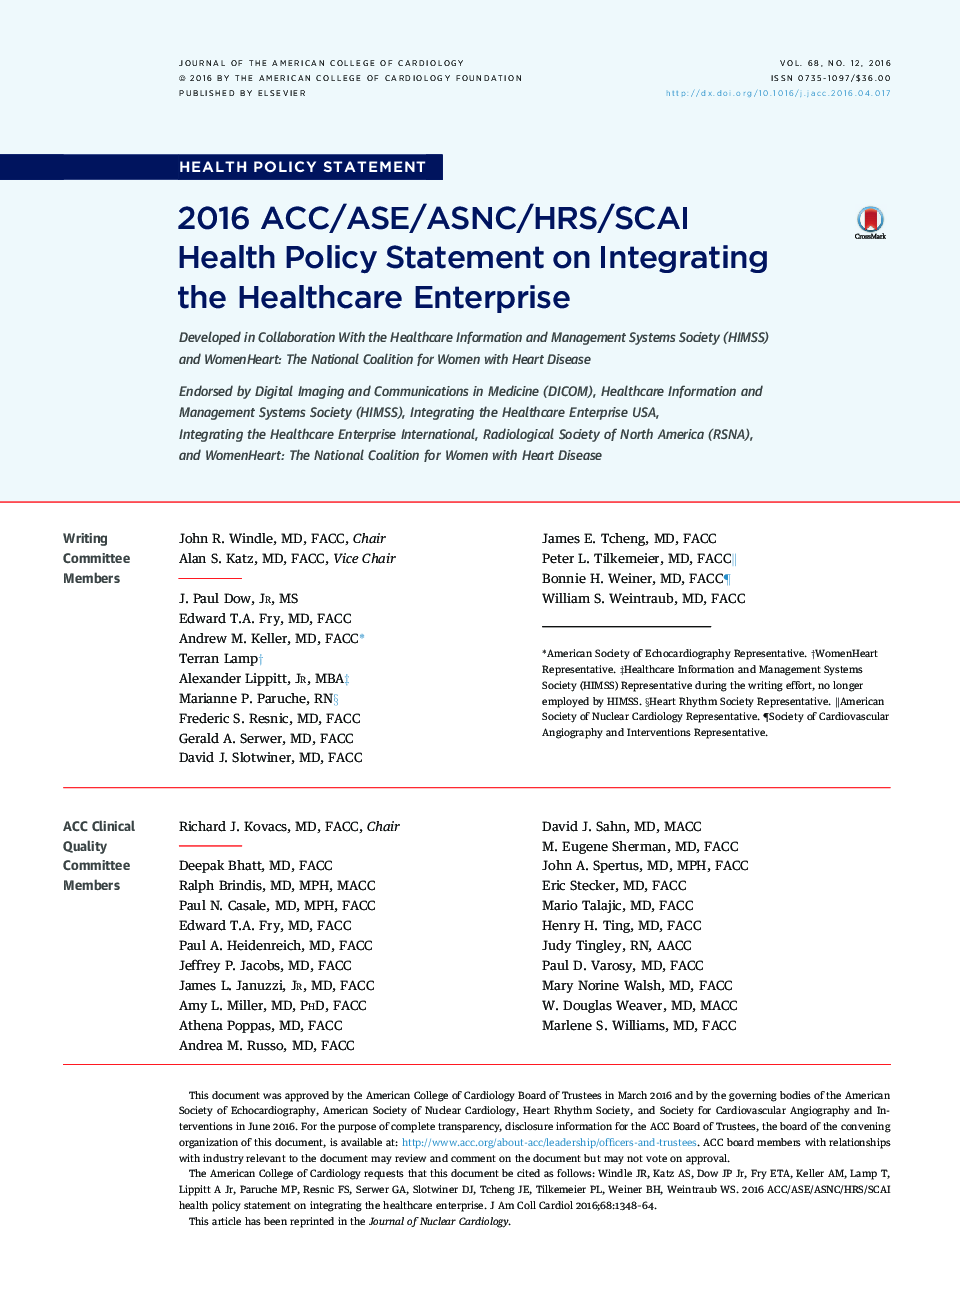 2016 ACC/ASE/ASNC/HRS/SCAI Health Policy Statement on Integrating the Healthcare Enterprise